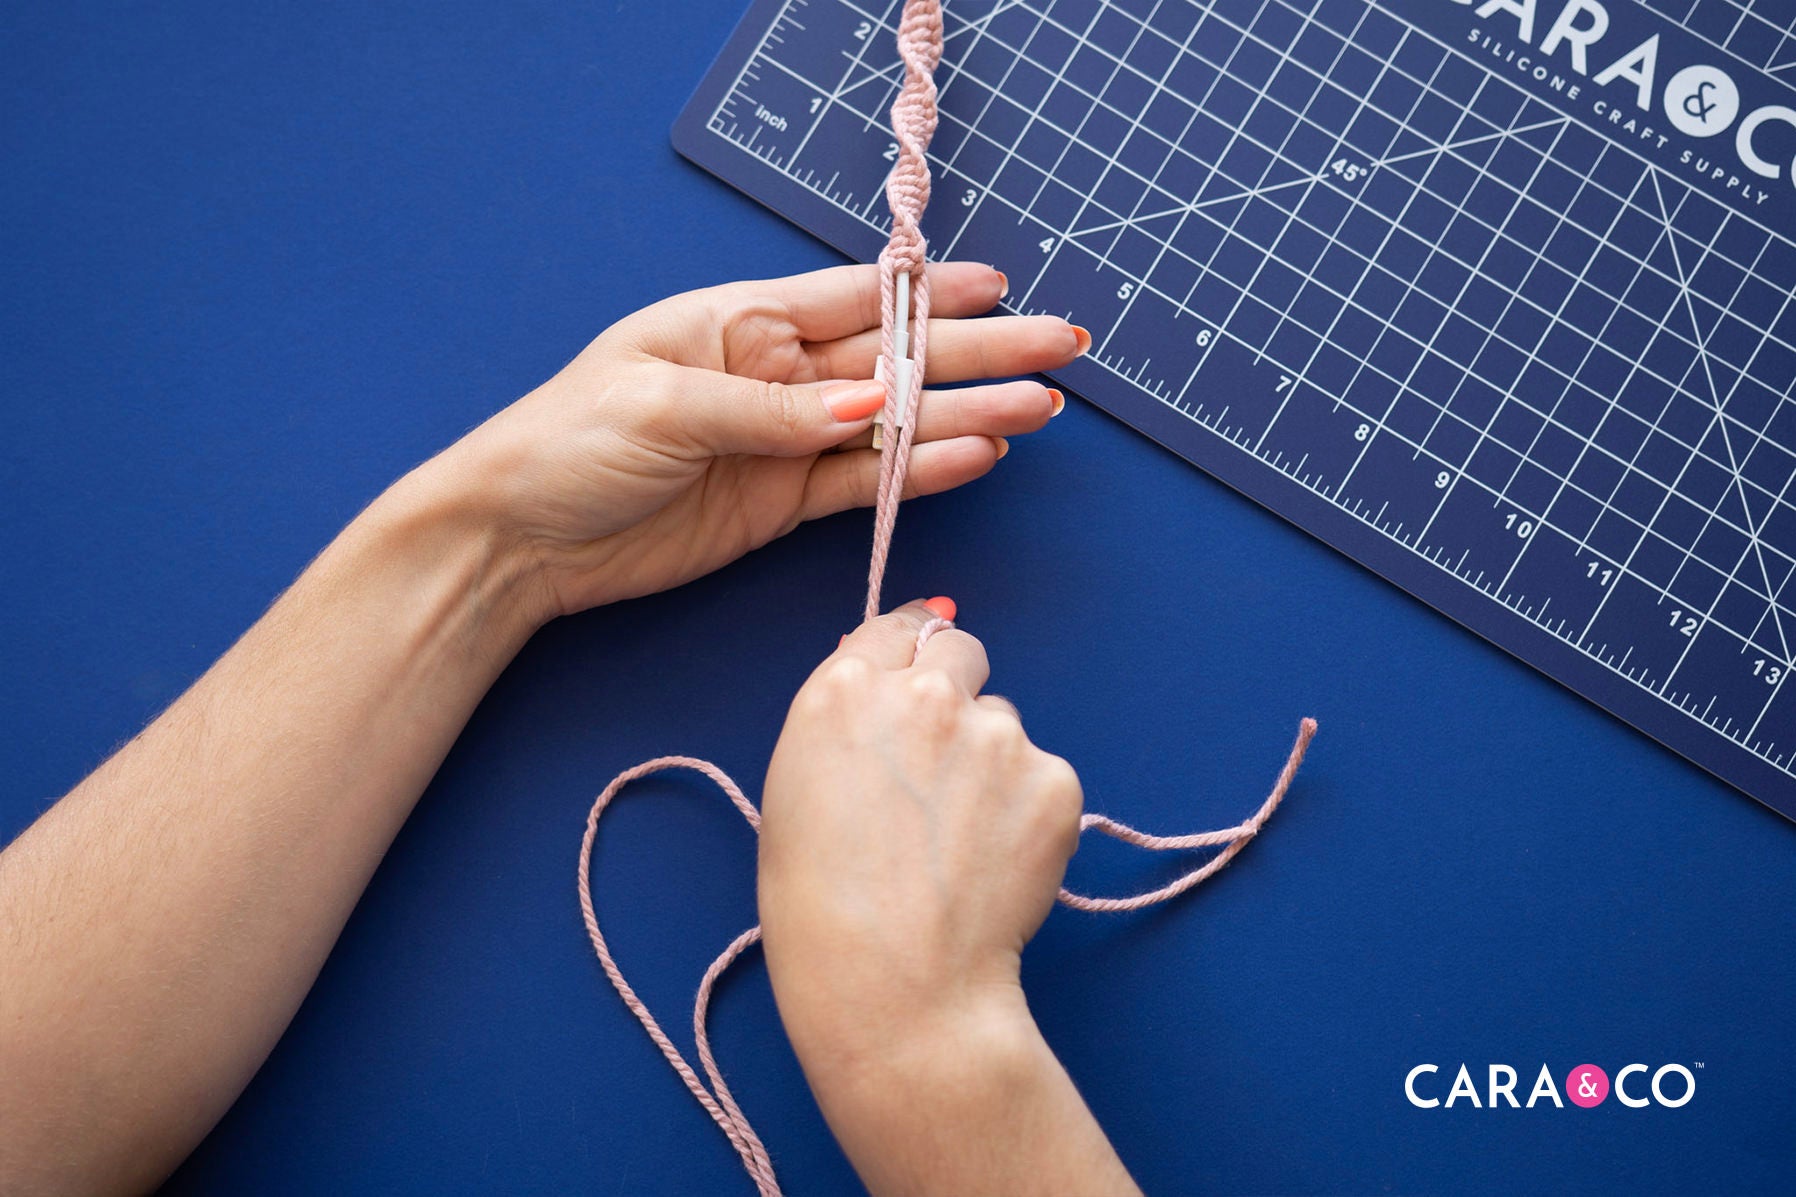 Easy Macrame crafts - Phone charger cord